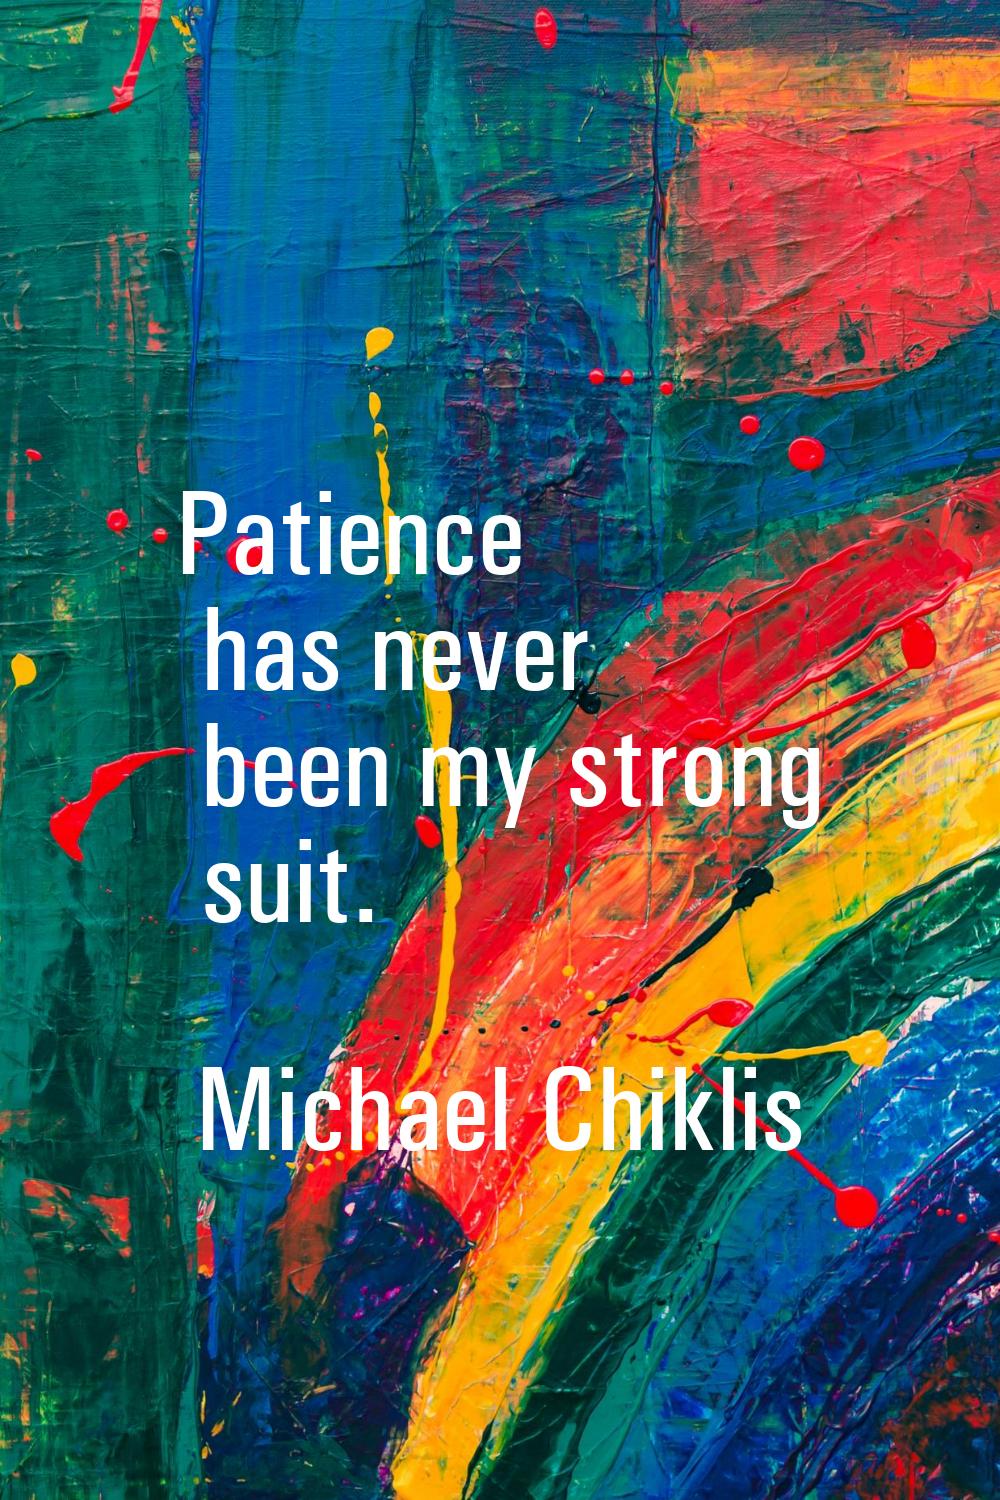 Patience has never been my strong suit.